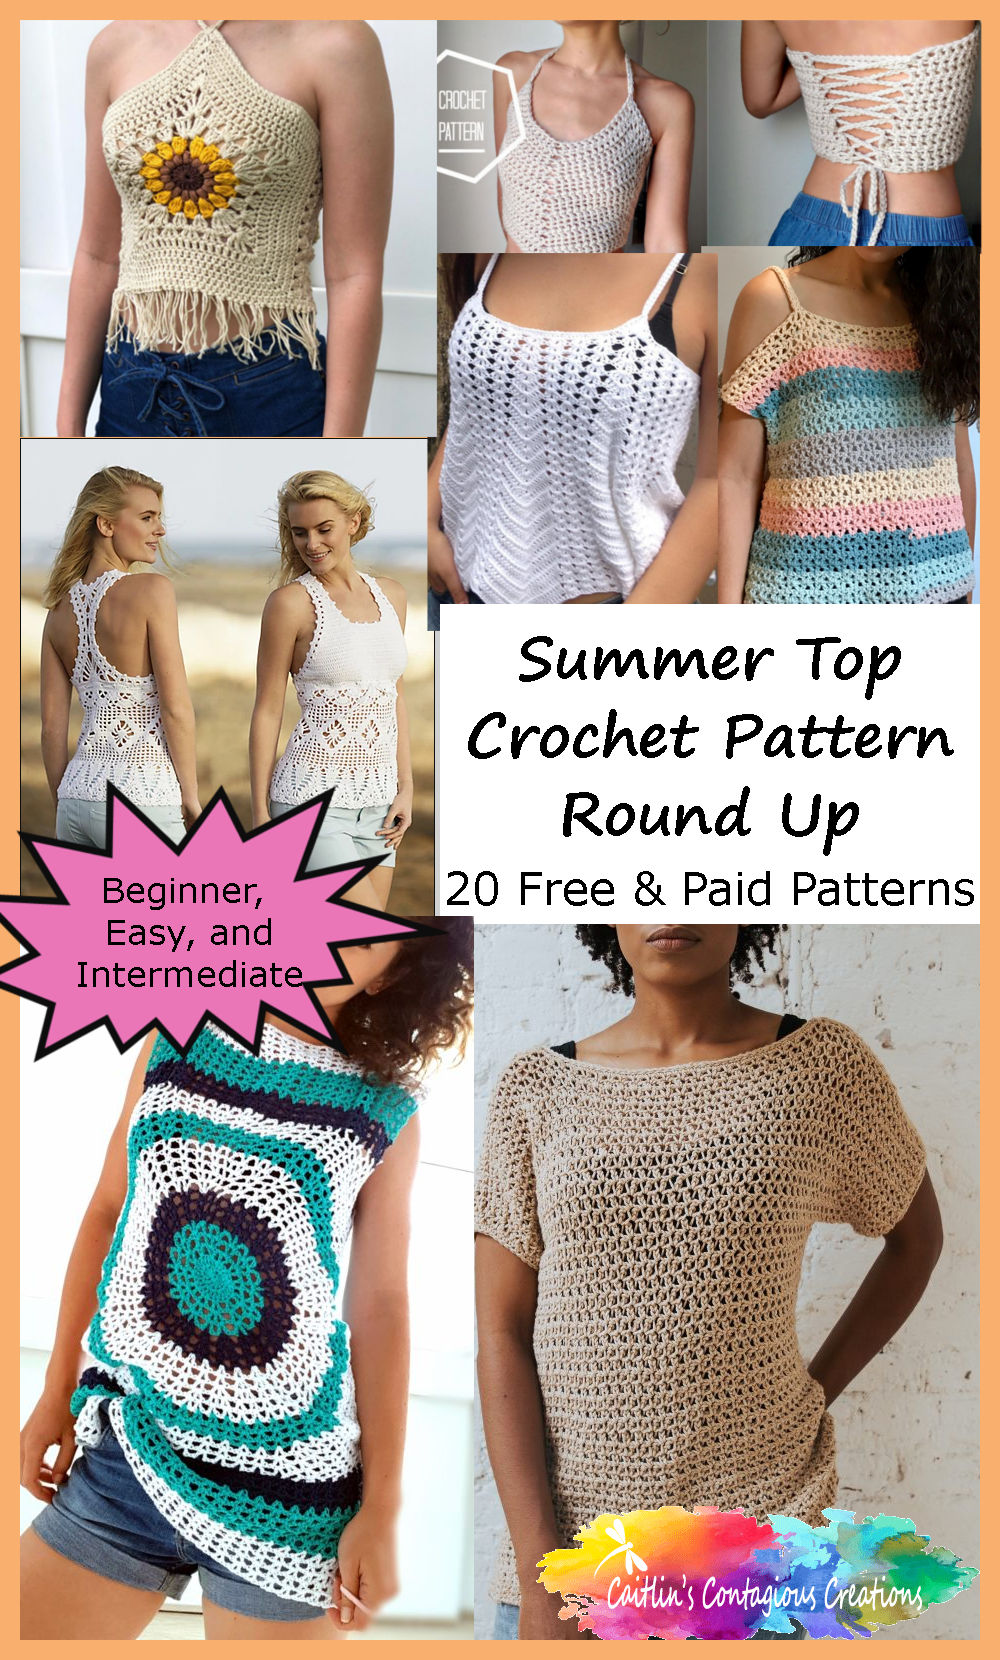 The Summer Top Crochet Pattern Round Up from Caitlin's Contagious Creations includes free and paid premium patterns. Each pattern features written instructions and photos. This collection features beginner, easy, and intermediate patterns for shirts, tees, tanks, halters, music festival tops, and bathing suit covers for women that are fun and casual. Start yours now! #SummerTopCrochetPattern #TankTopCrochetPattern #WomenCrochetPattern